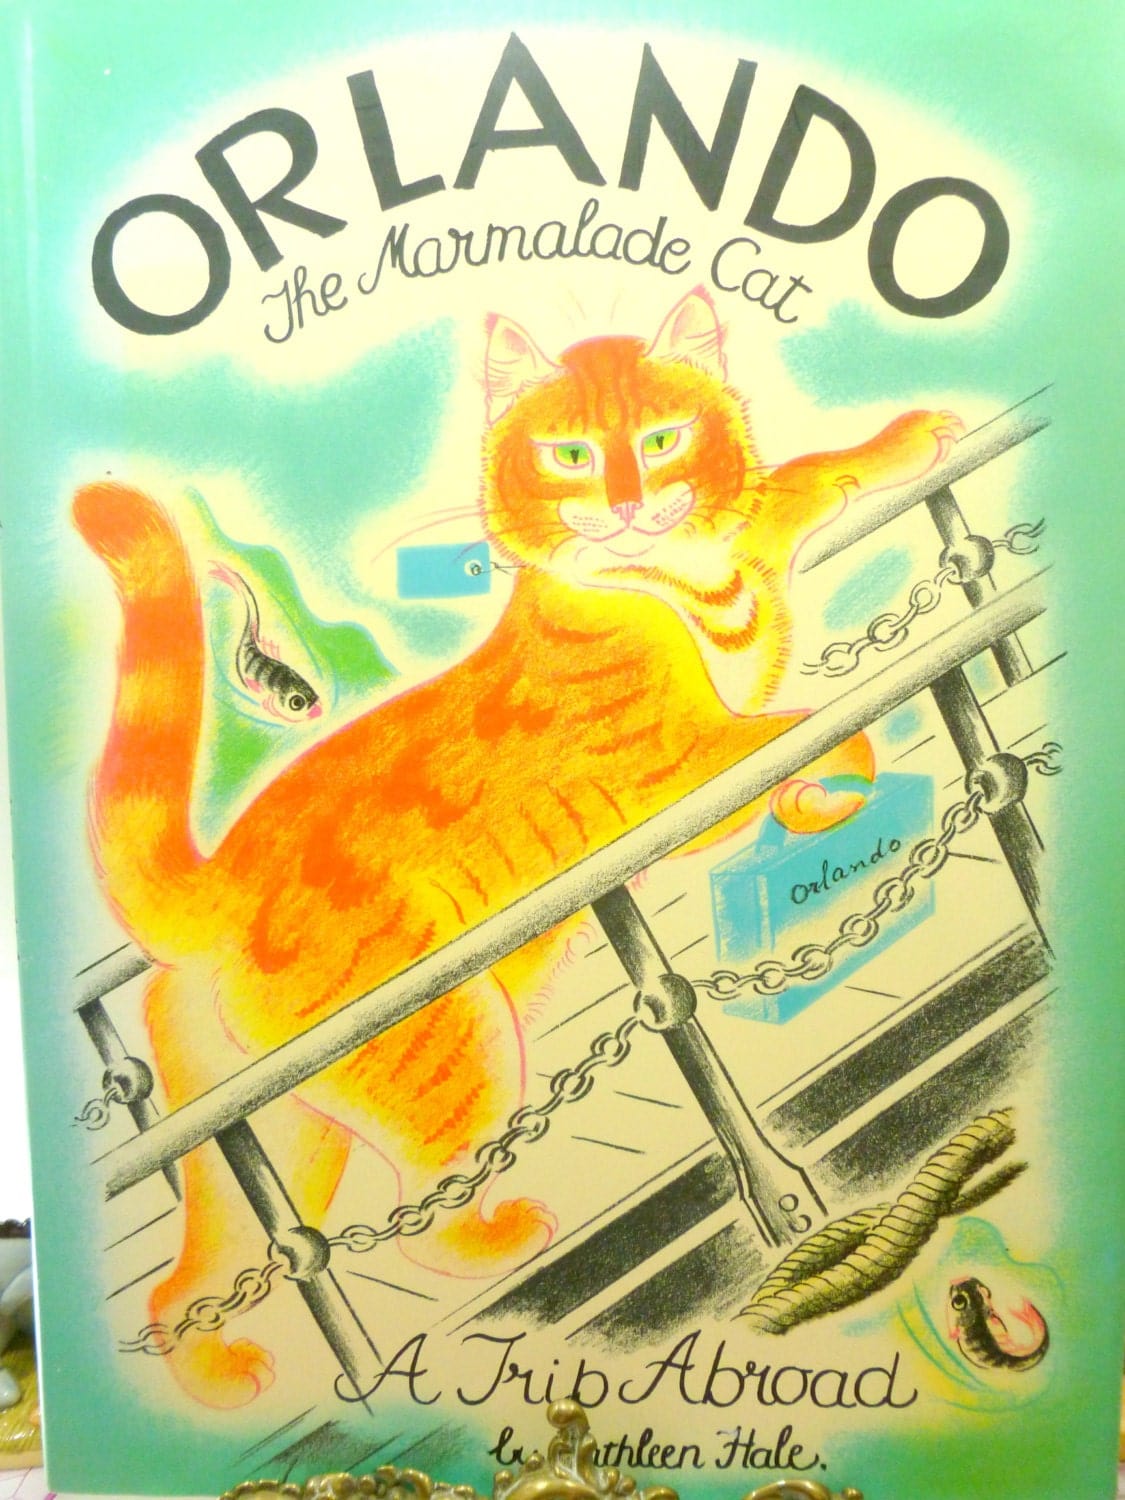 Orlando the Marmalade Cat Beautifully Illustrated Large Childrens Book by Kathleen Hale 1st Edition Thus 1990s